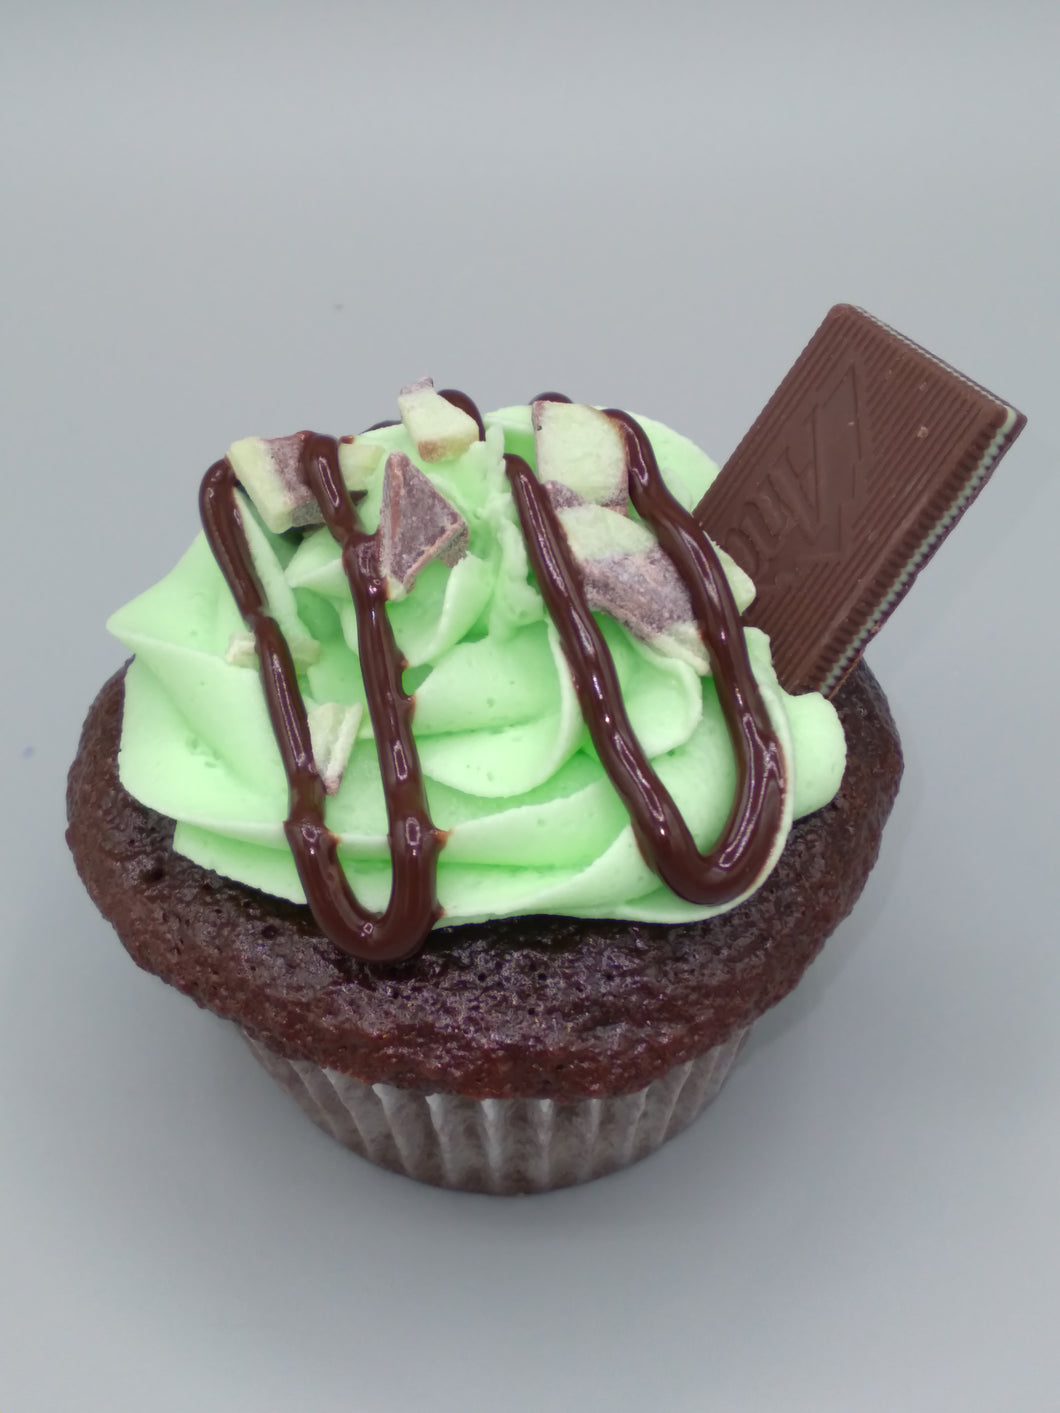 Cupcakes - Andes Mint